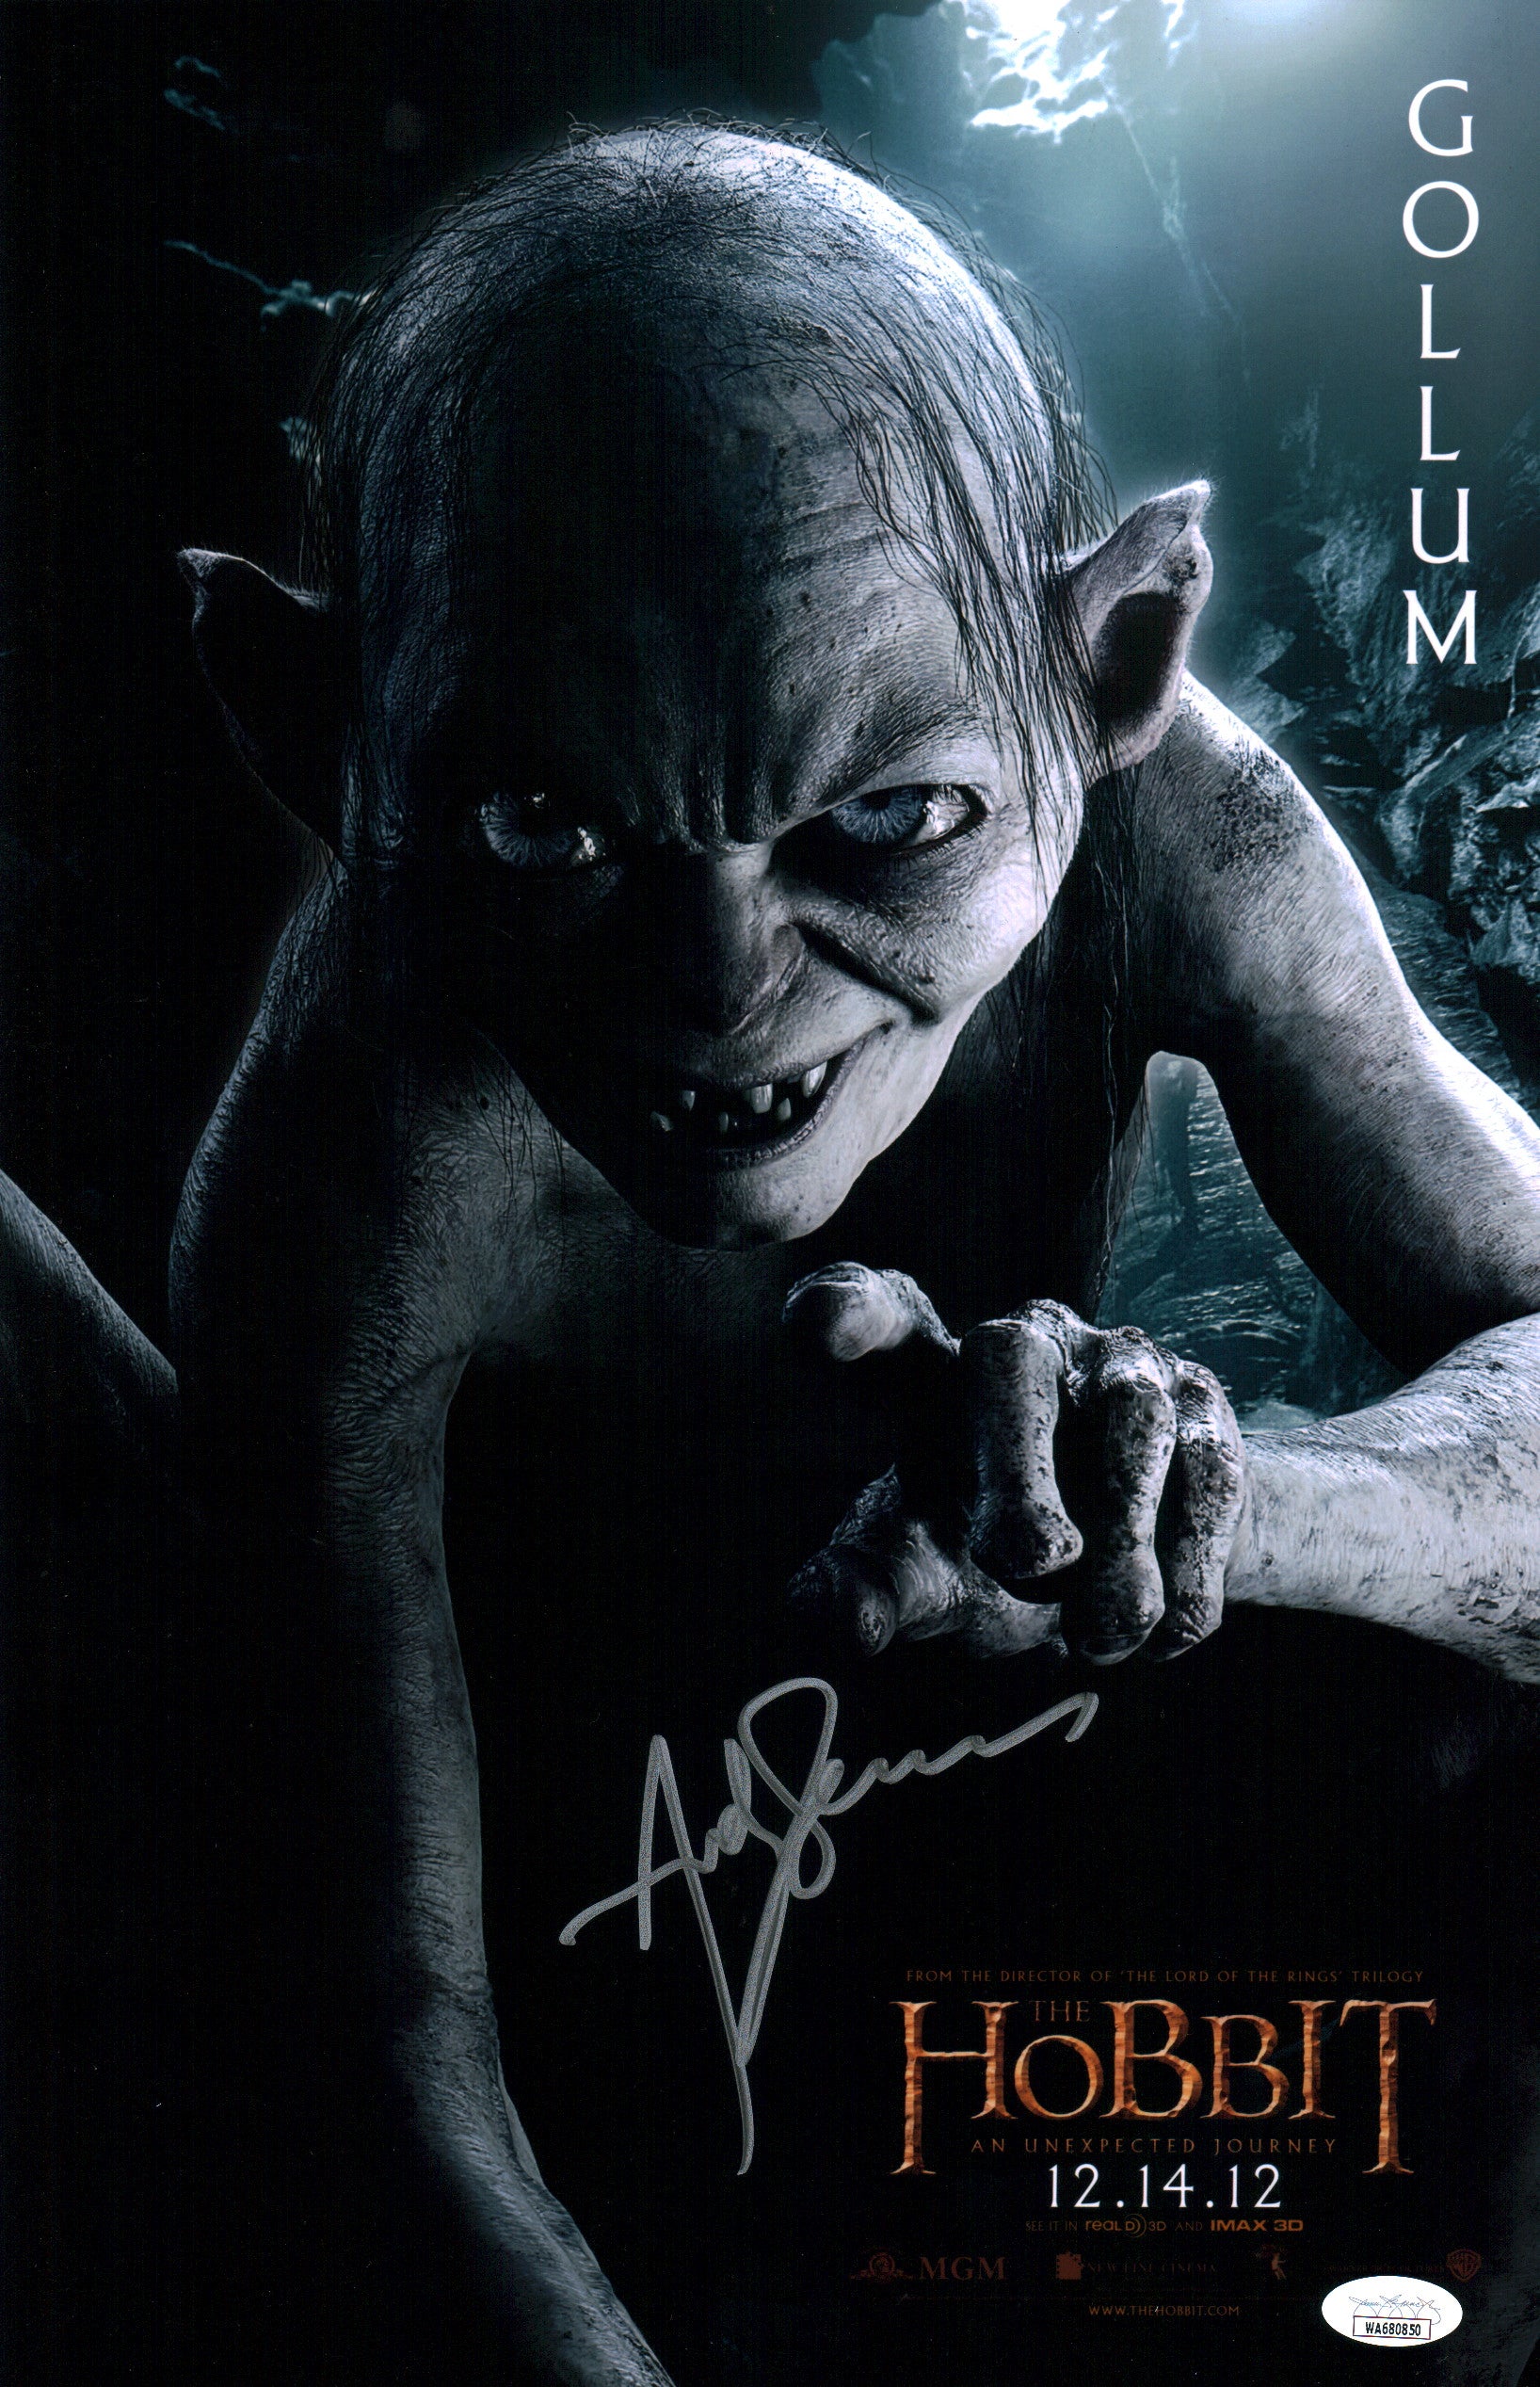 Andy Serkis The Hobbit 11x17 Signed Mini Poster JSA Certified Autograp